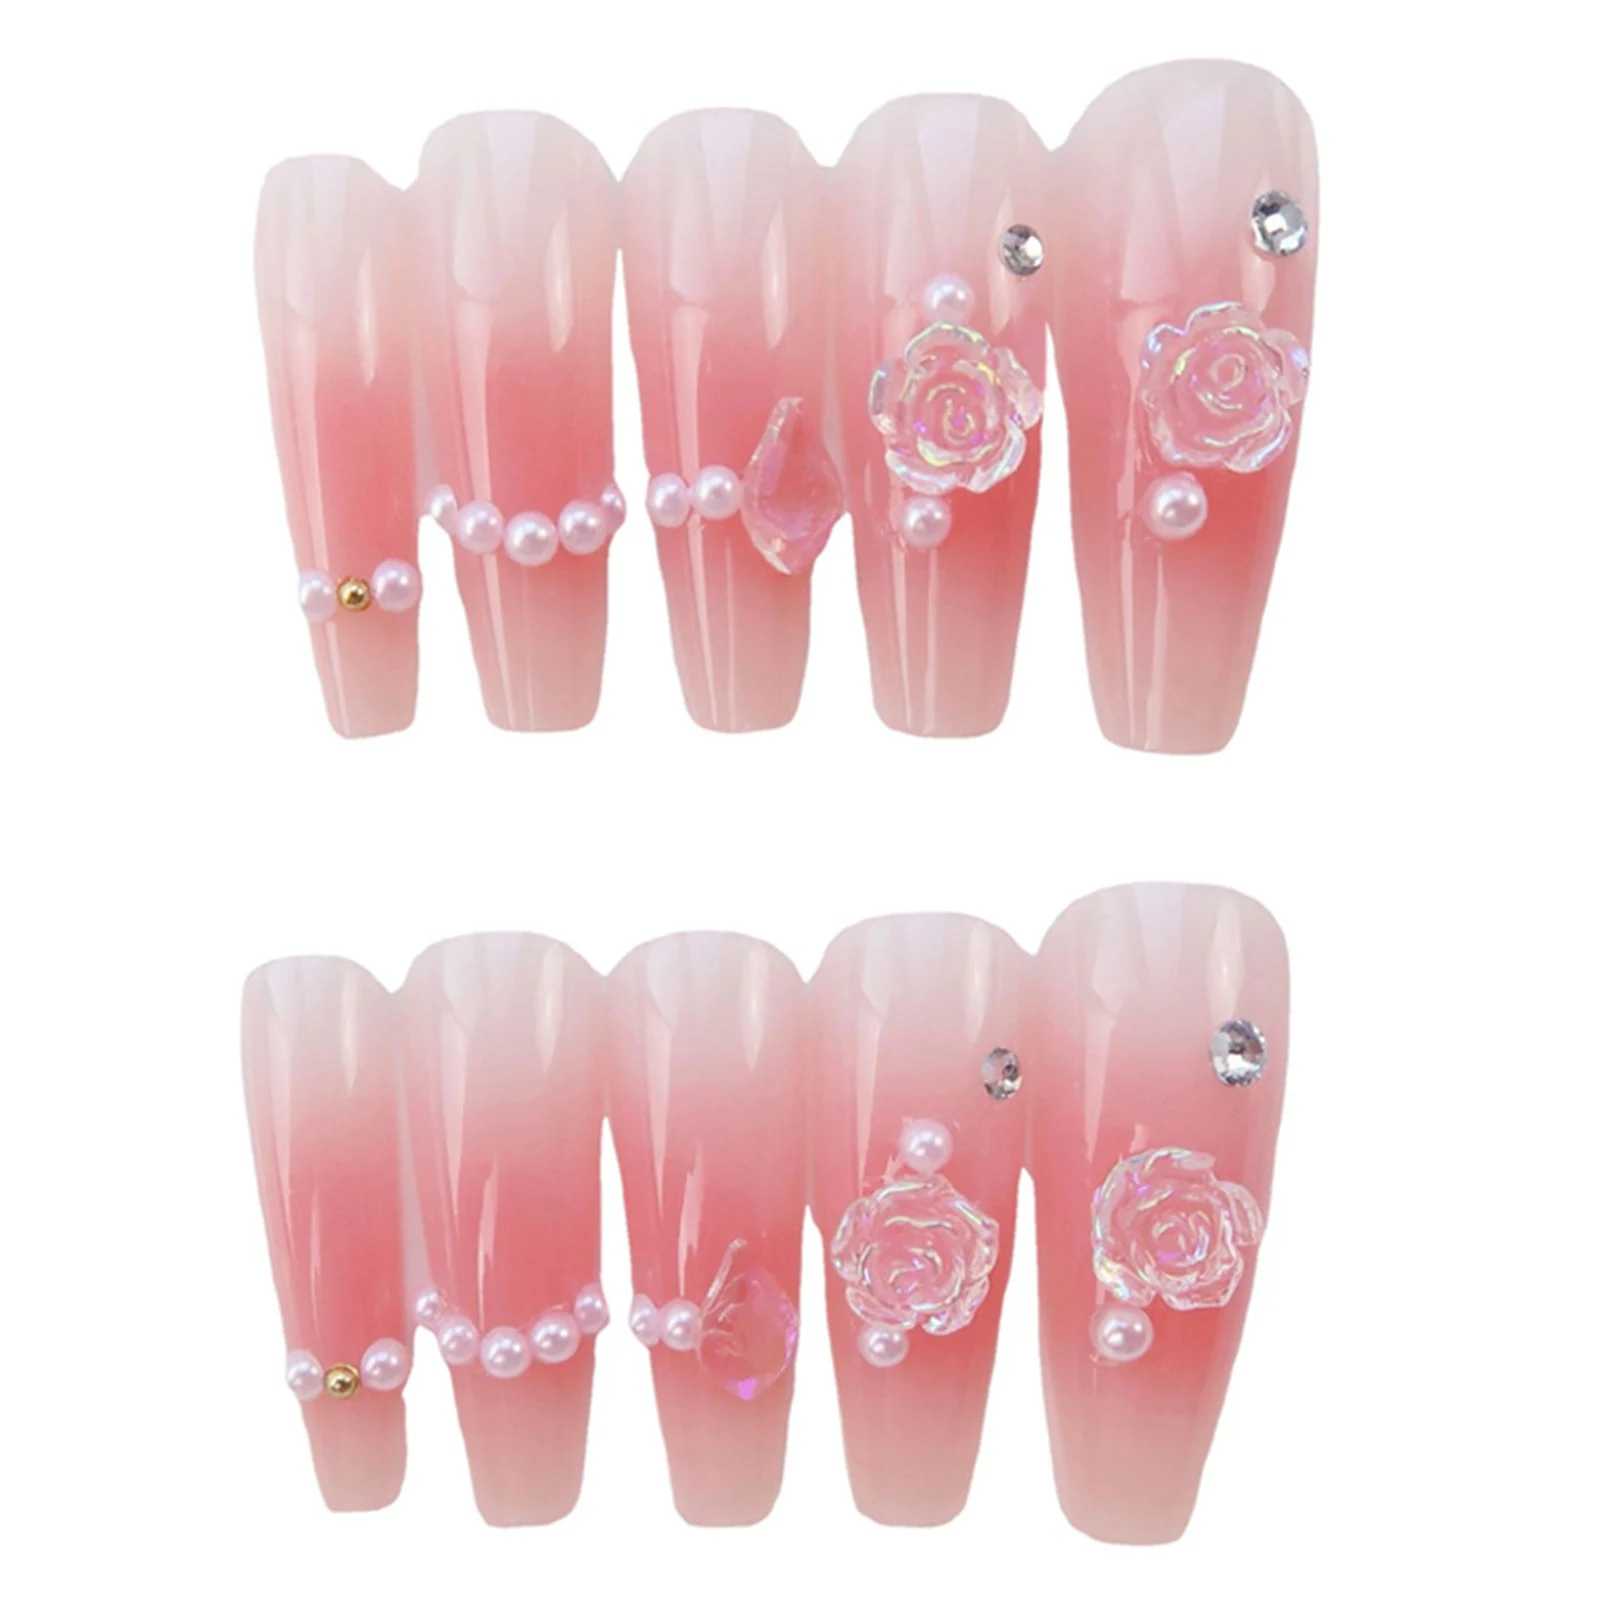 

Stereo Camellia Decorated Fake Nails No Gel And UV Light Needed Fake Nails for Dance Parties Weekend Trips